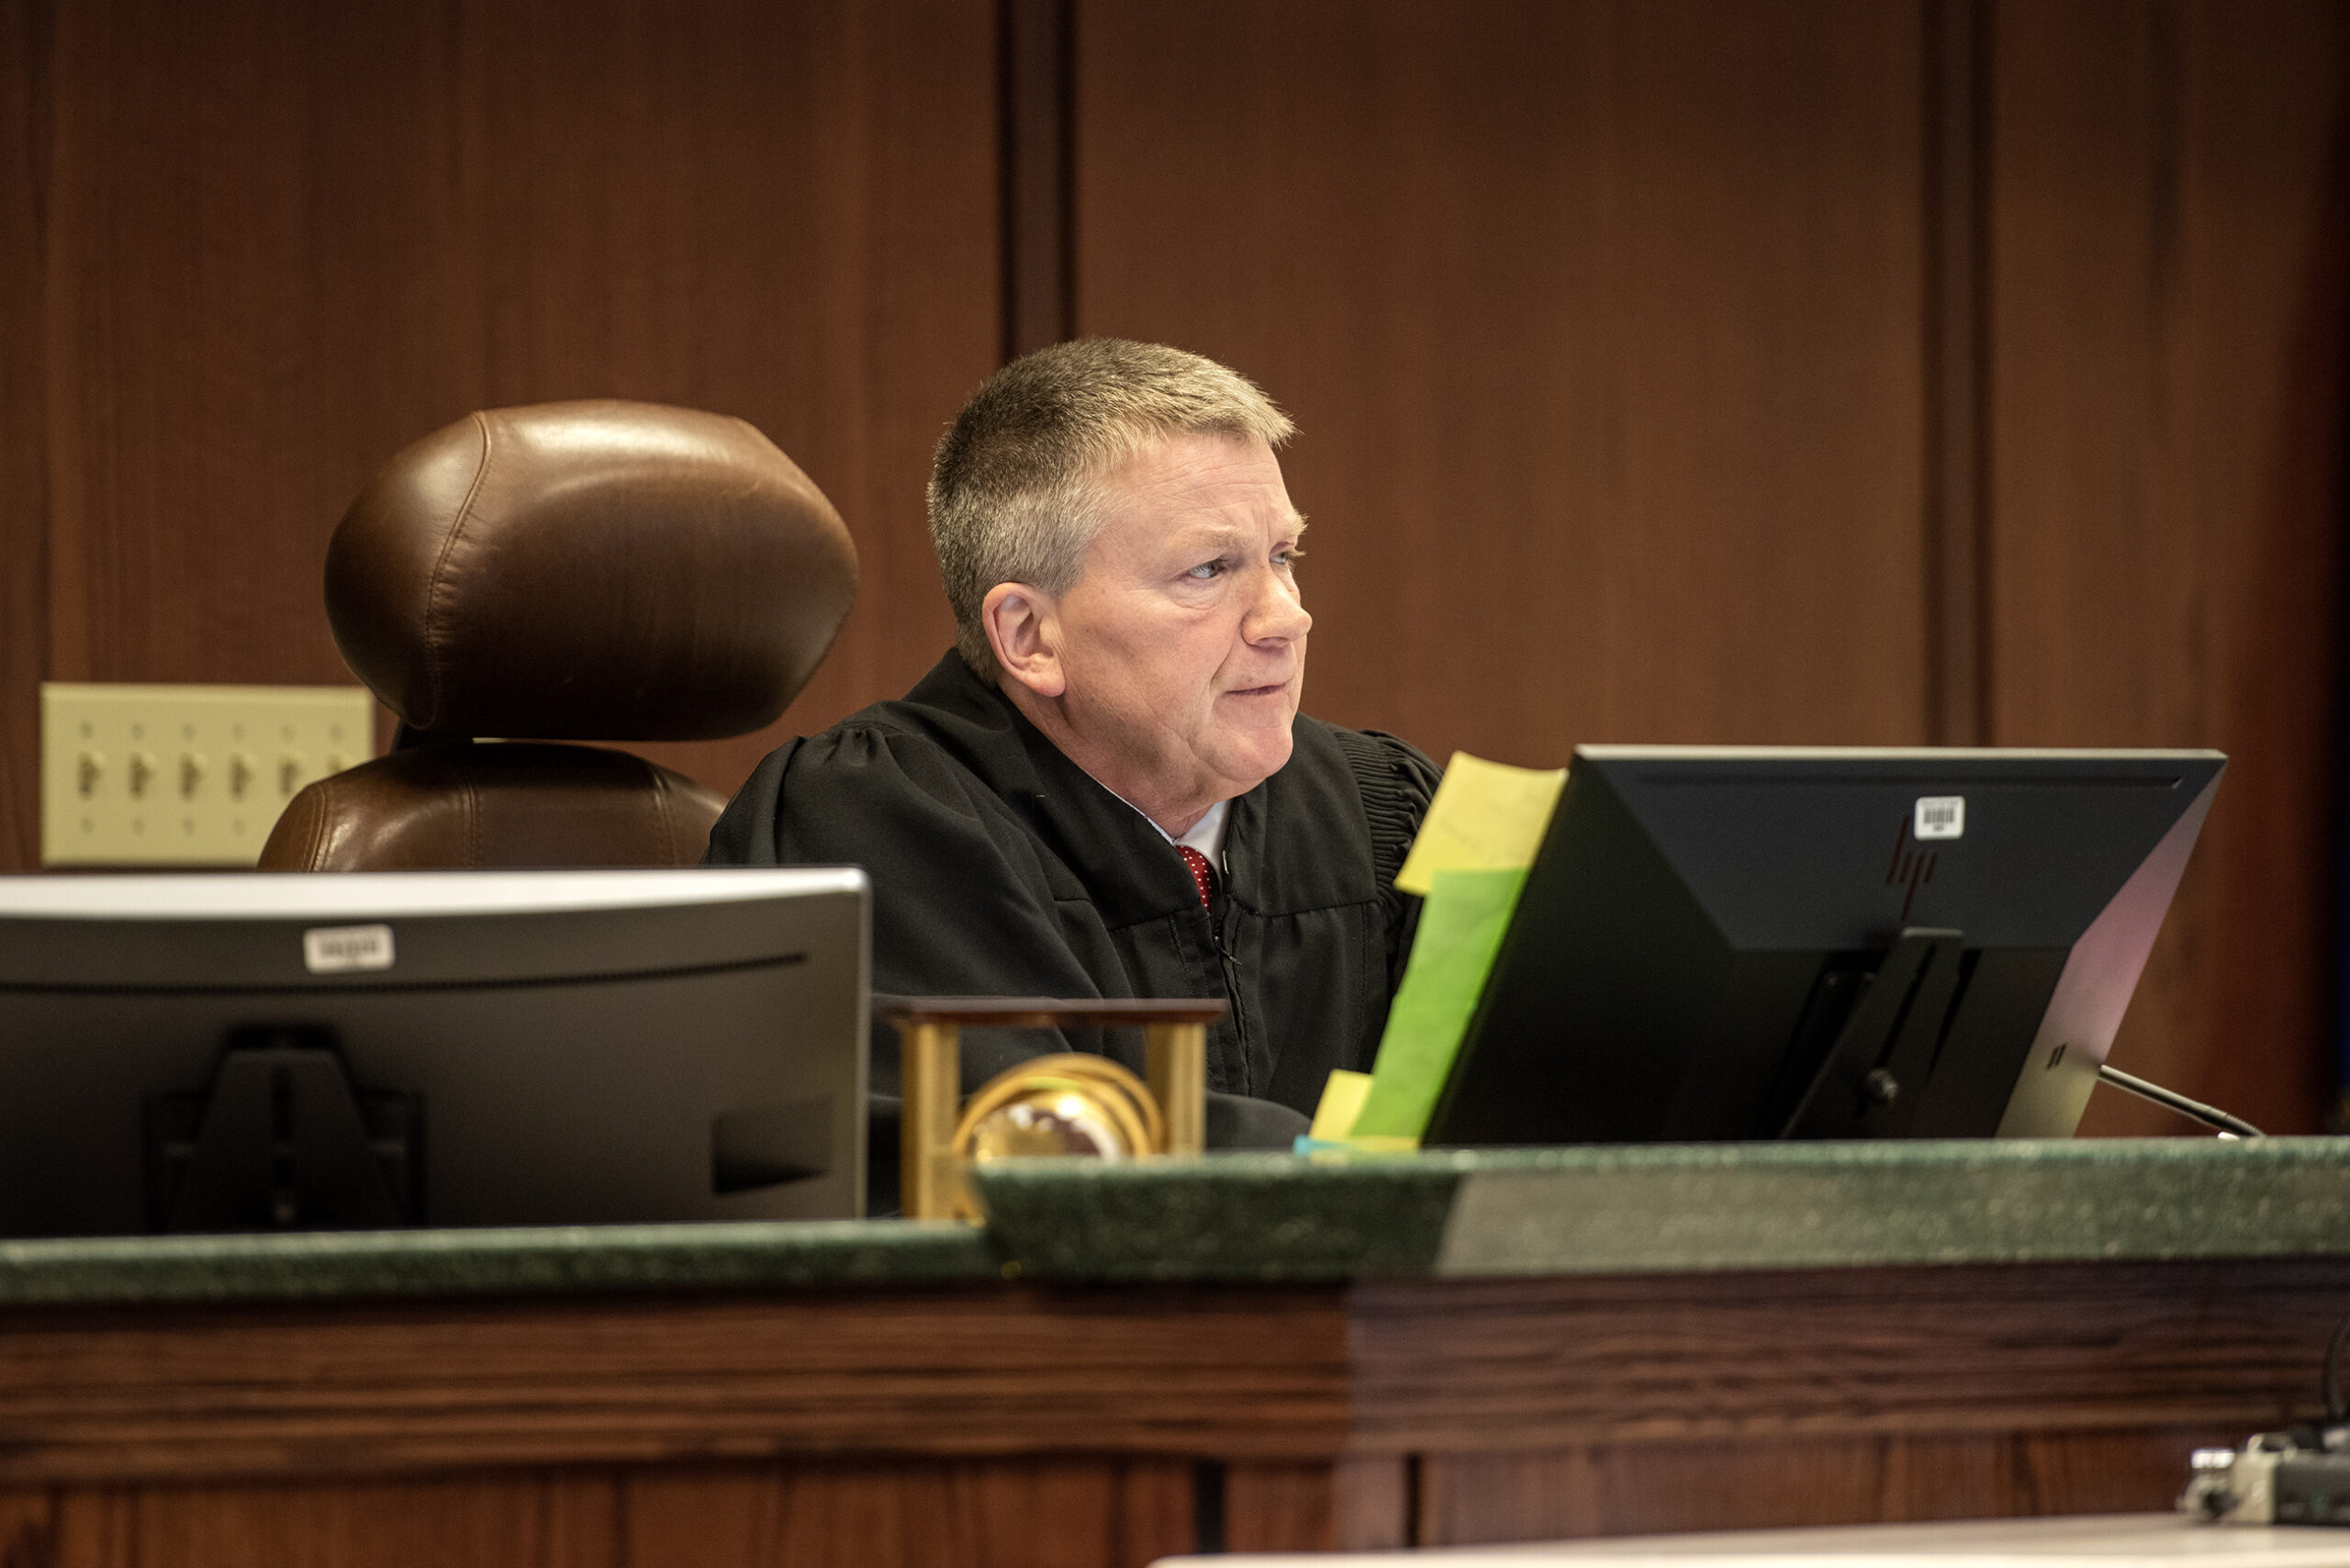 A judge sits at the front of the courtroom in a black robe.